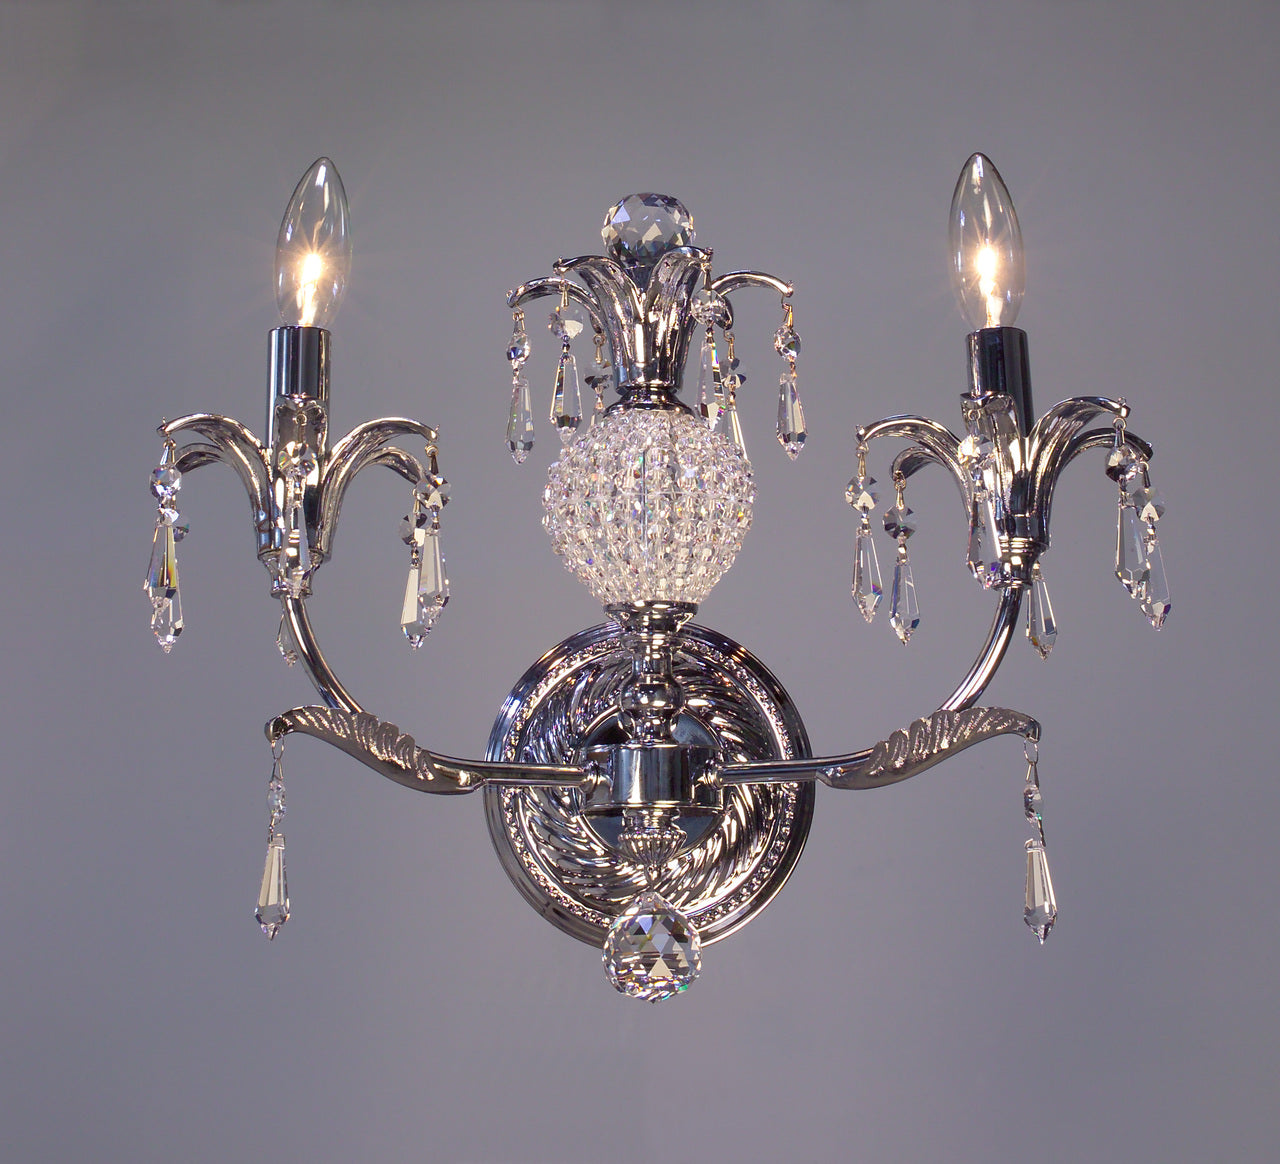 Classic Lighting 16112 CH SC Sharon Crystal Wall Sconce in Chrome